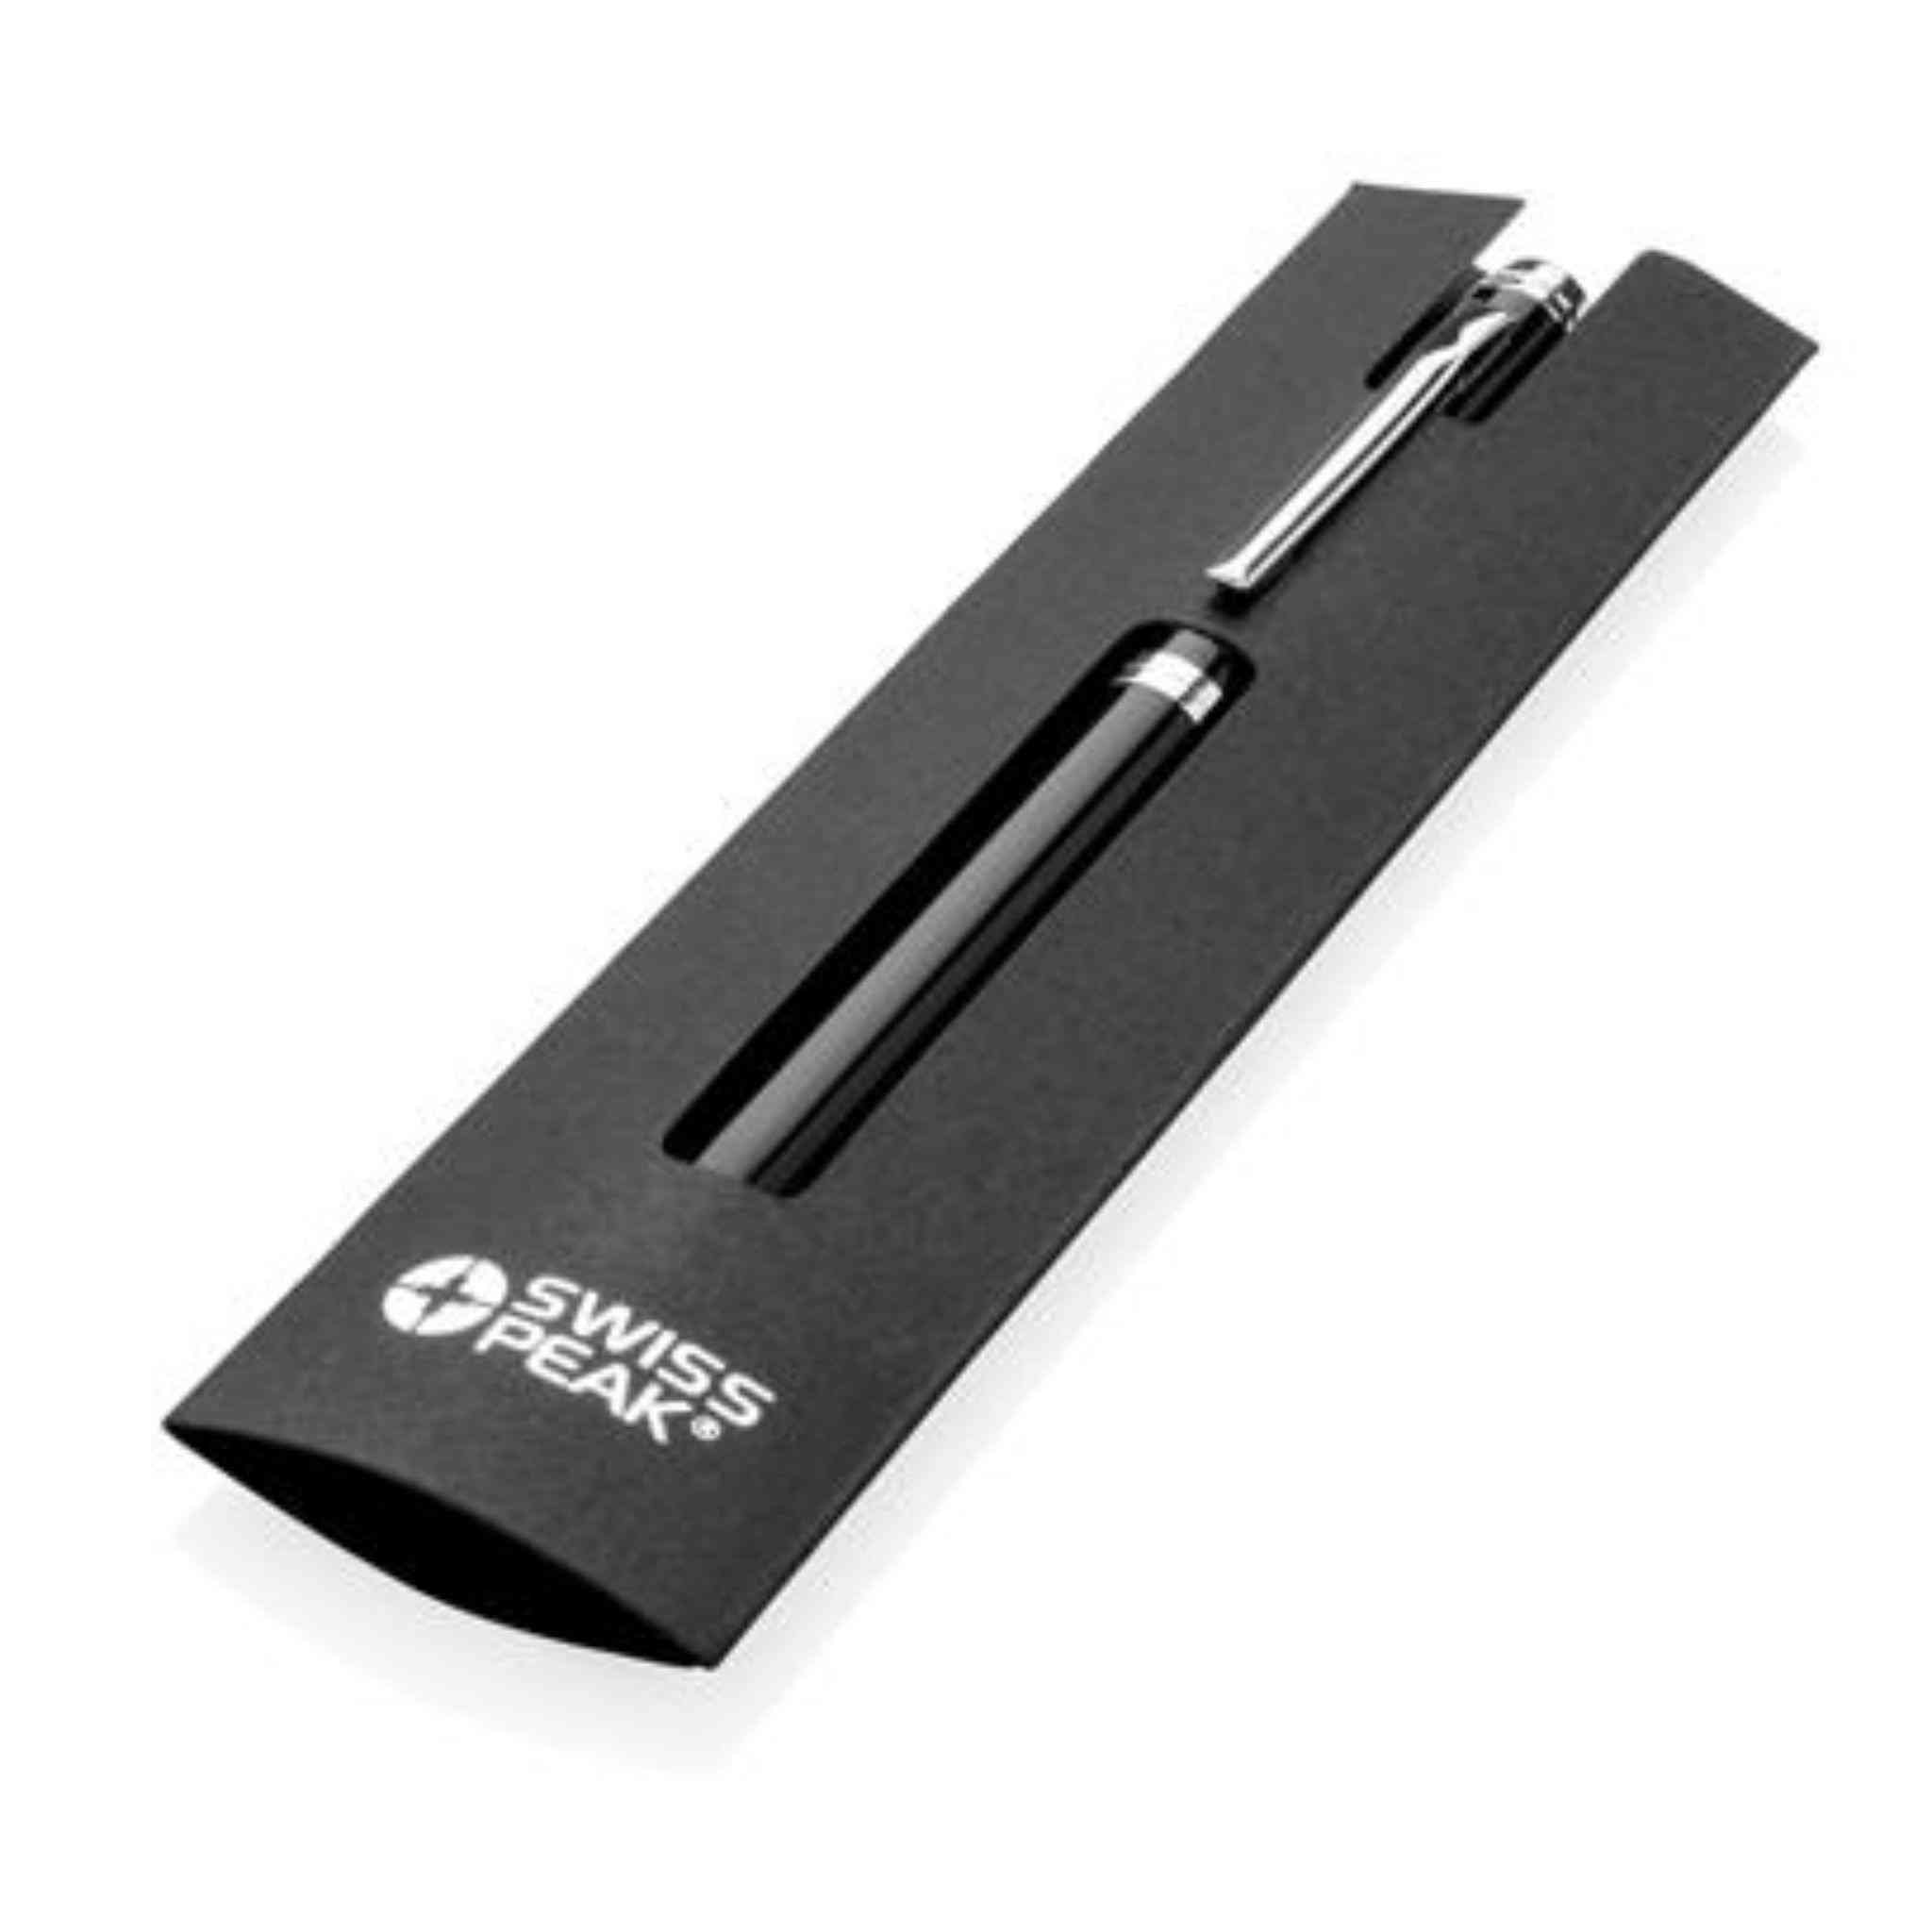 Black and silver pen shown inside a pouch